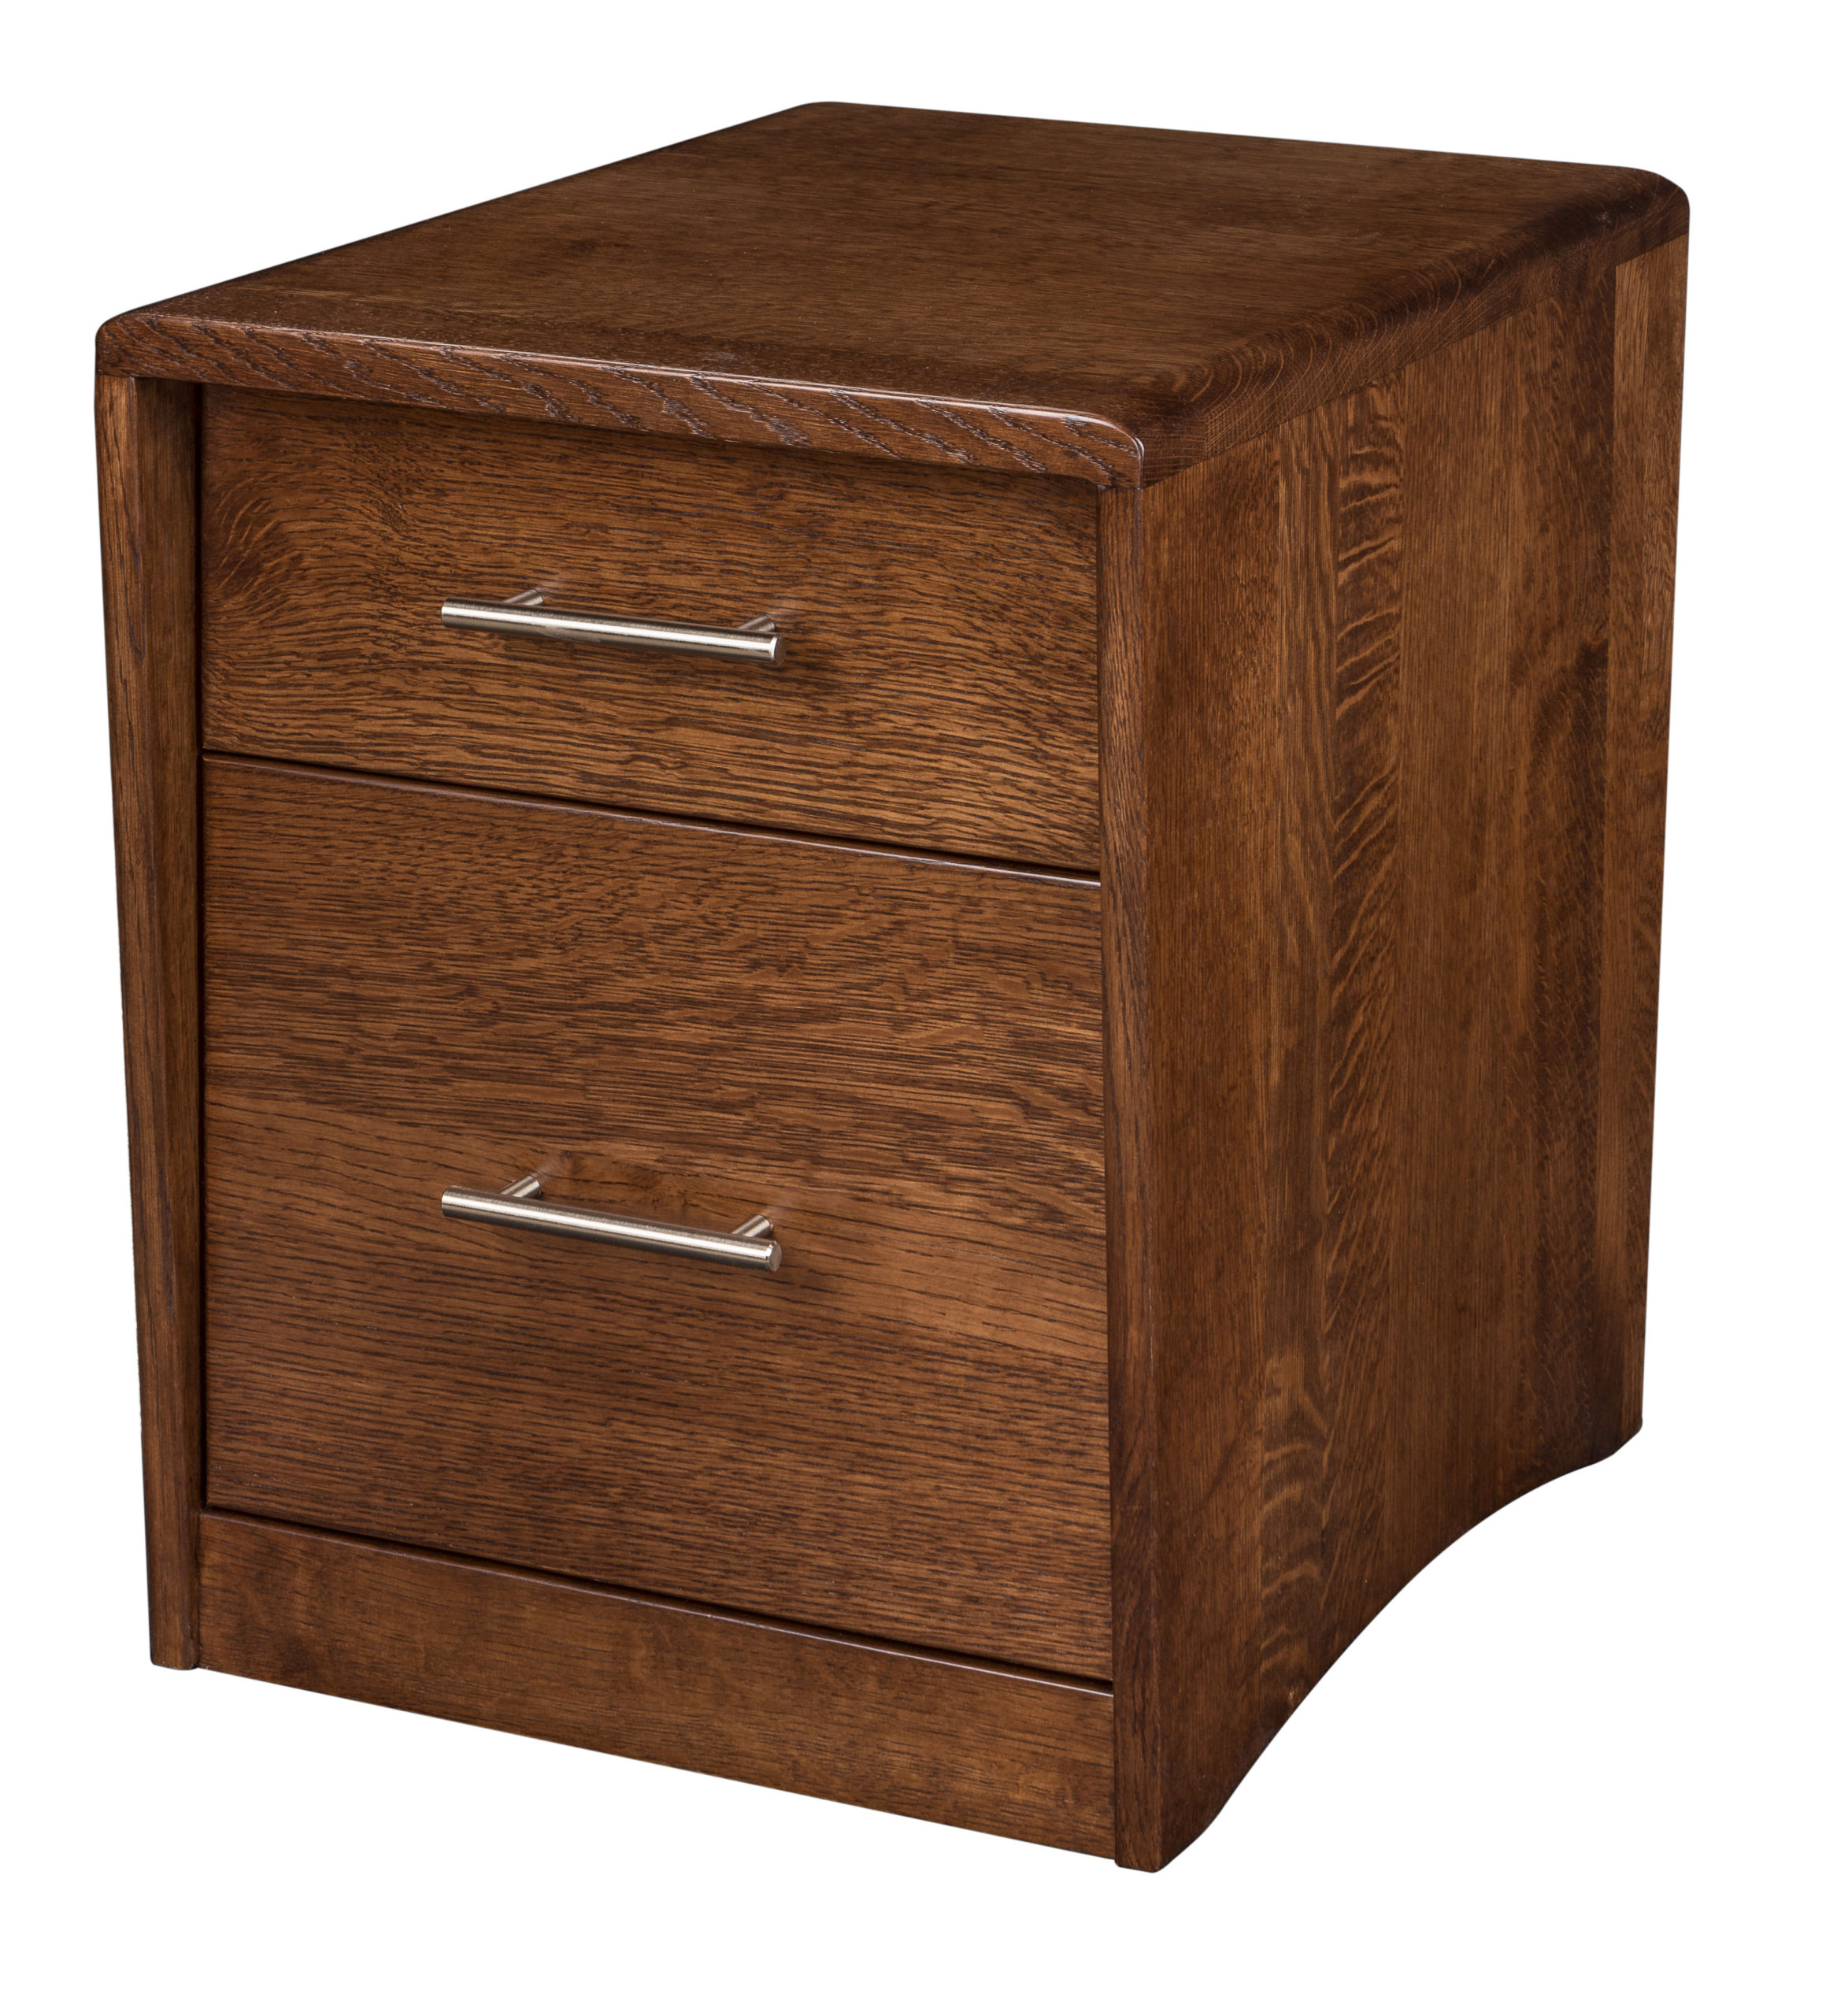 solid wood file cabinet Off 62%